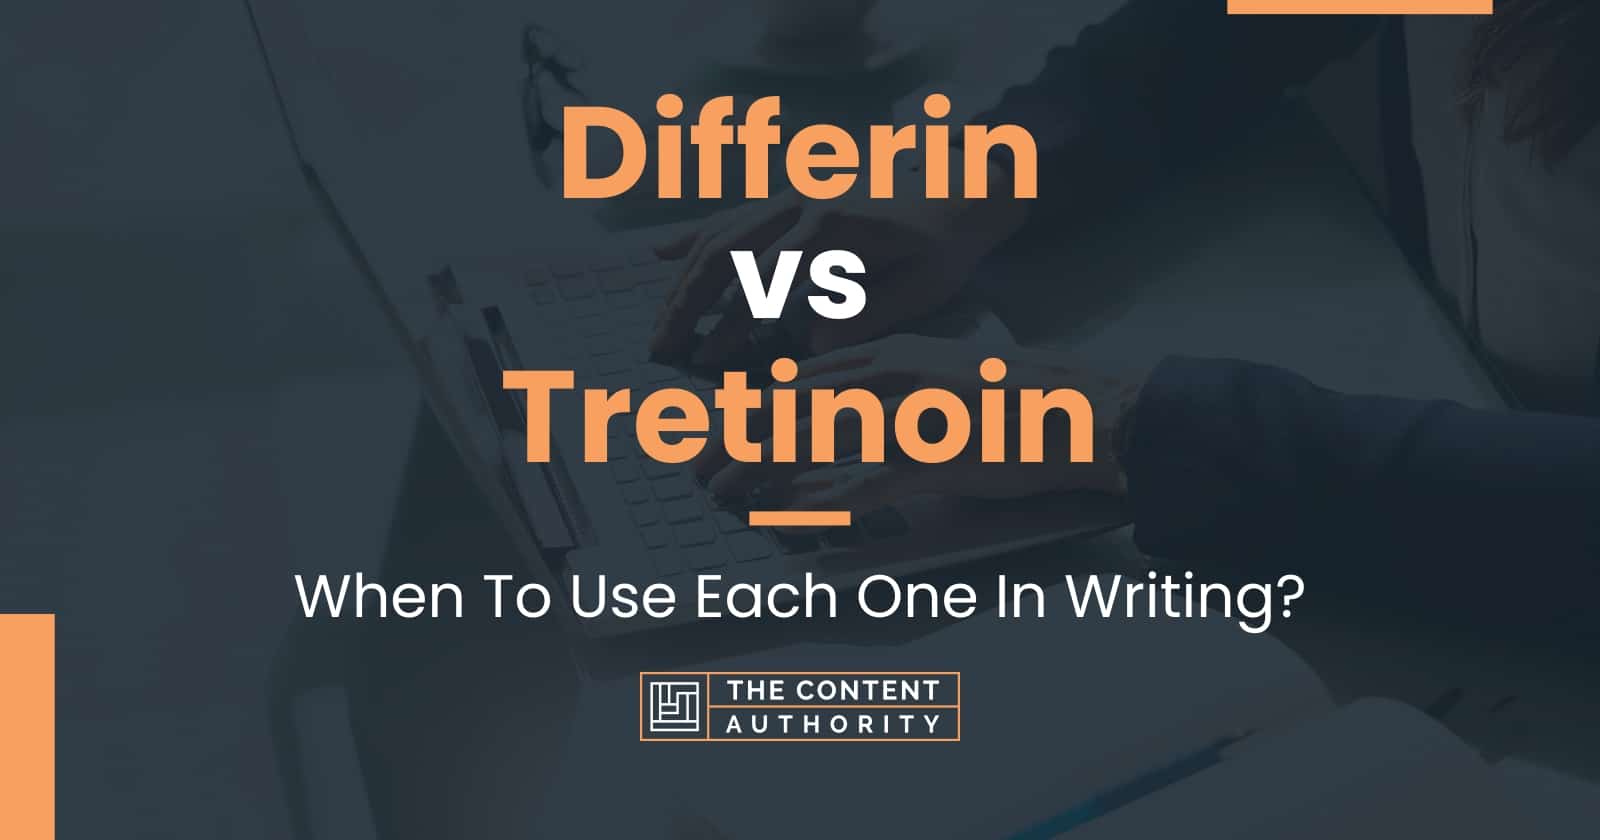 differin-vs-tretinoin-when-to-use-each-one-in-writing